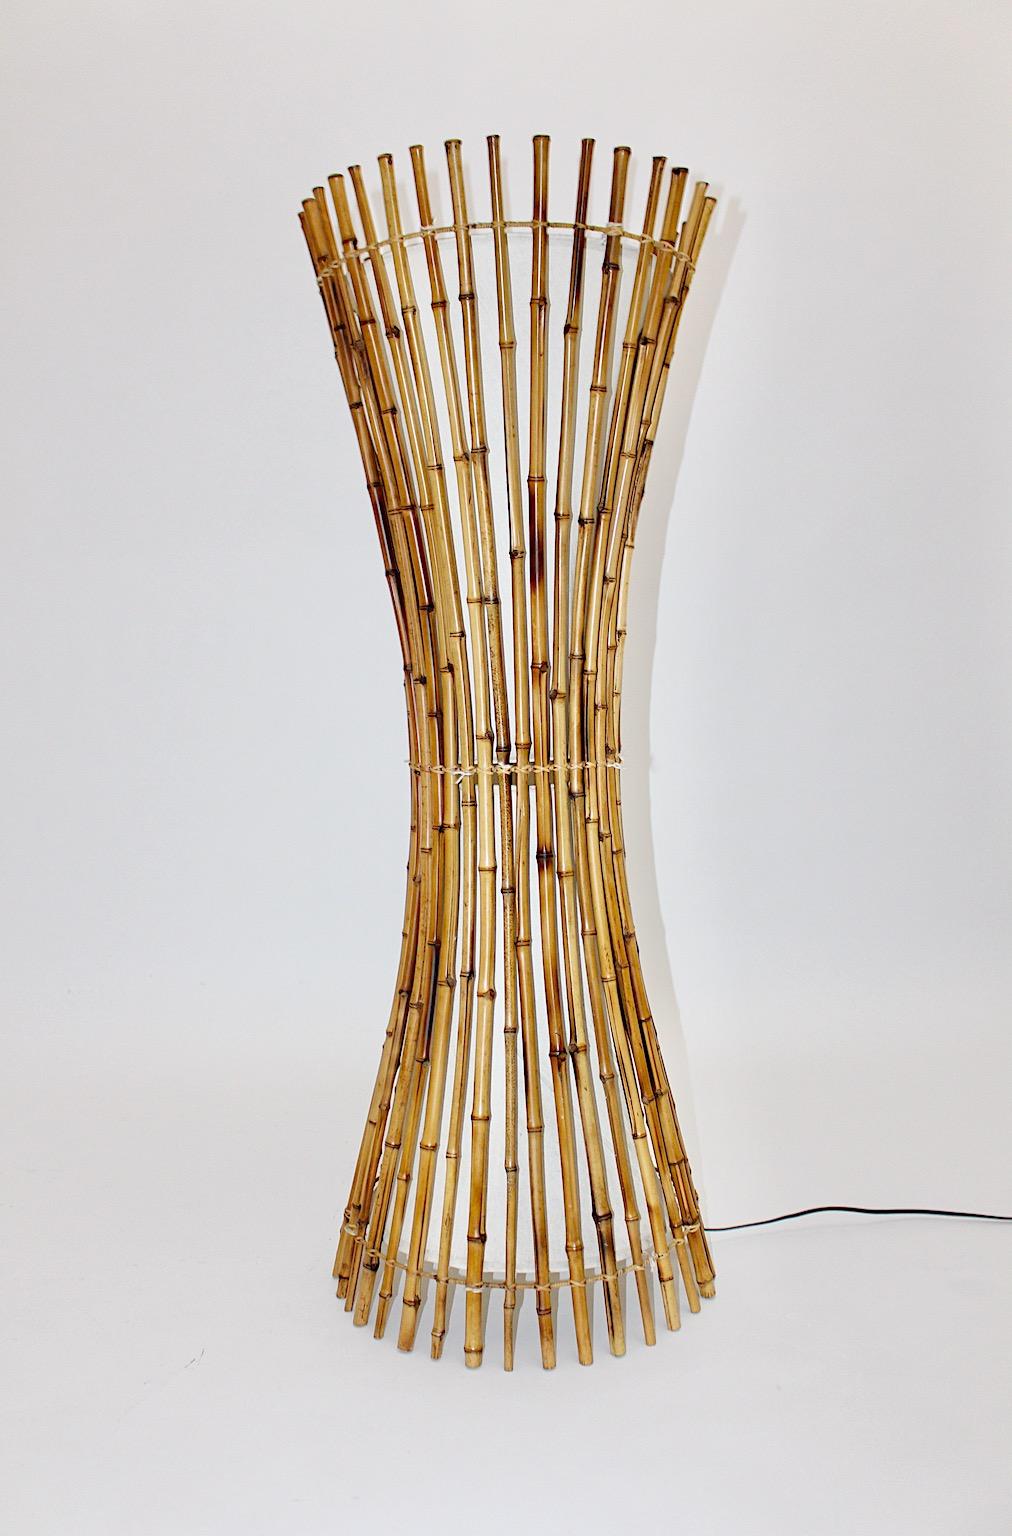 Mid-Century Modern vintage floor lamp shaped like a sheaf of rattan designed and executed 1970s Italy.
The organic shape of the sheaf of rattan shows many rattan sticks underlined with butter cream canvas fabric.
It lights with two E 27